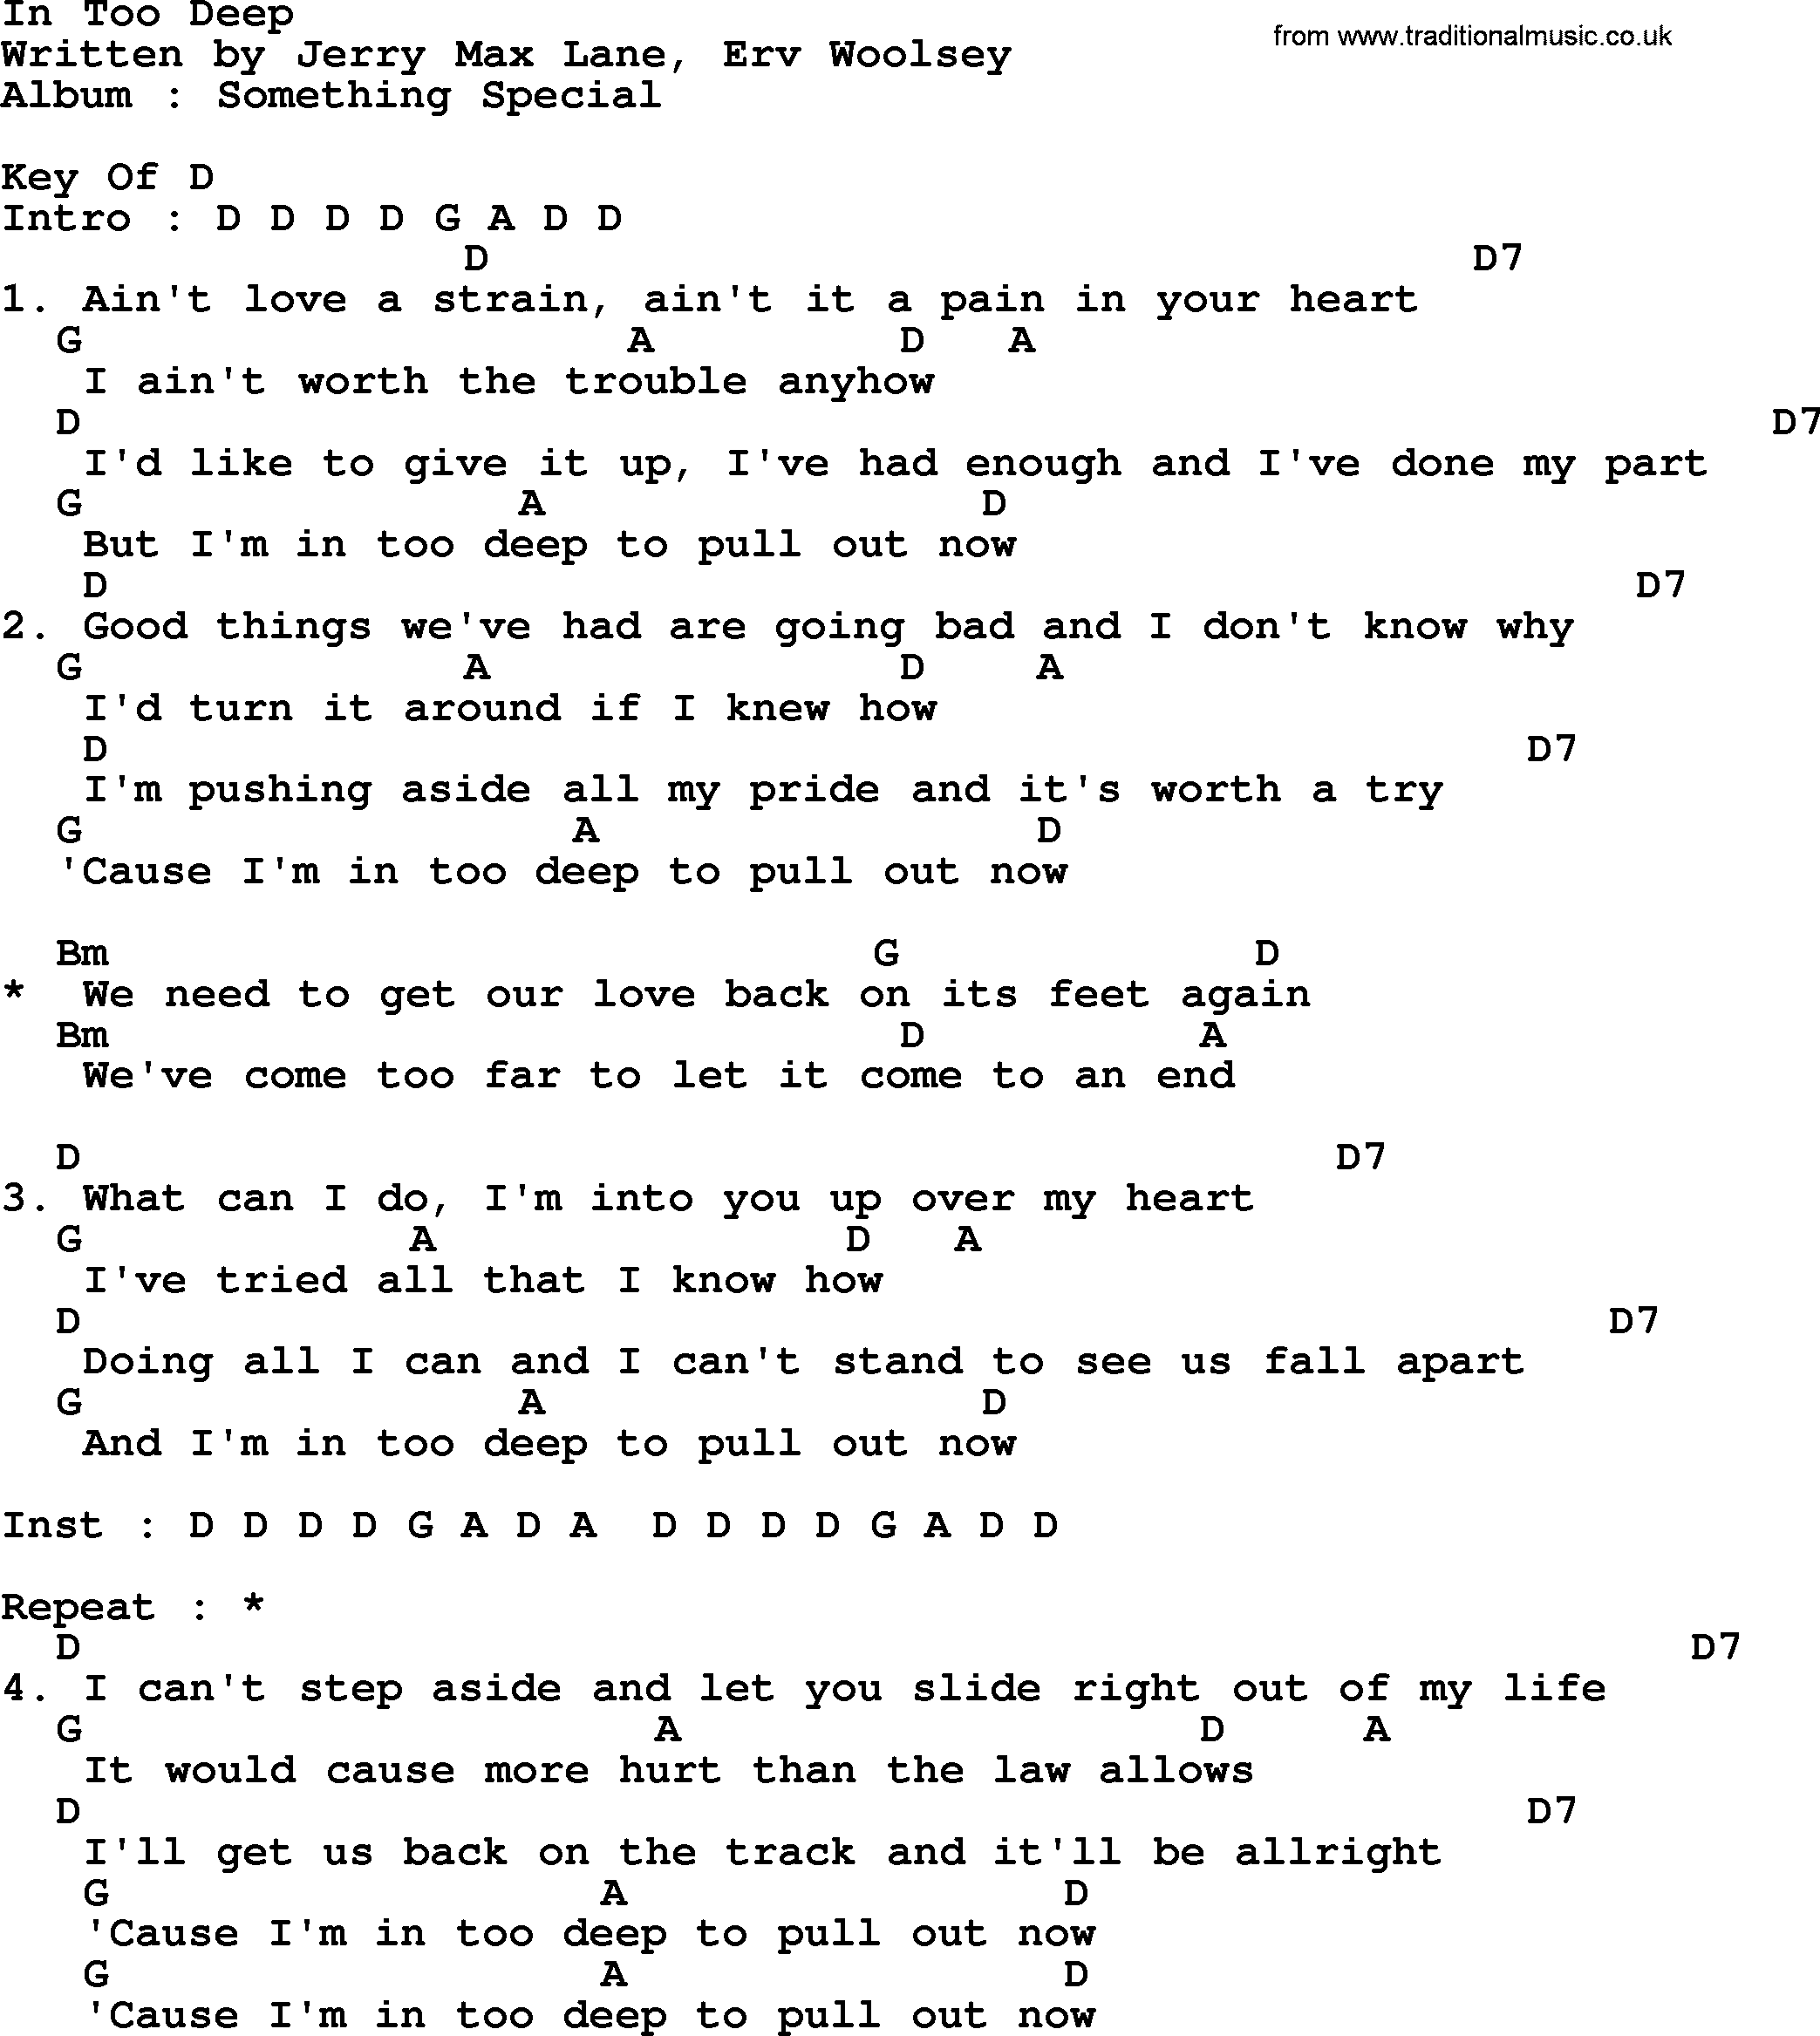 George Strait song: In Too Deep, lyrics and chords